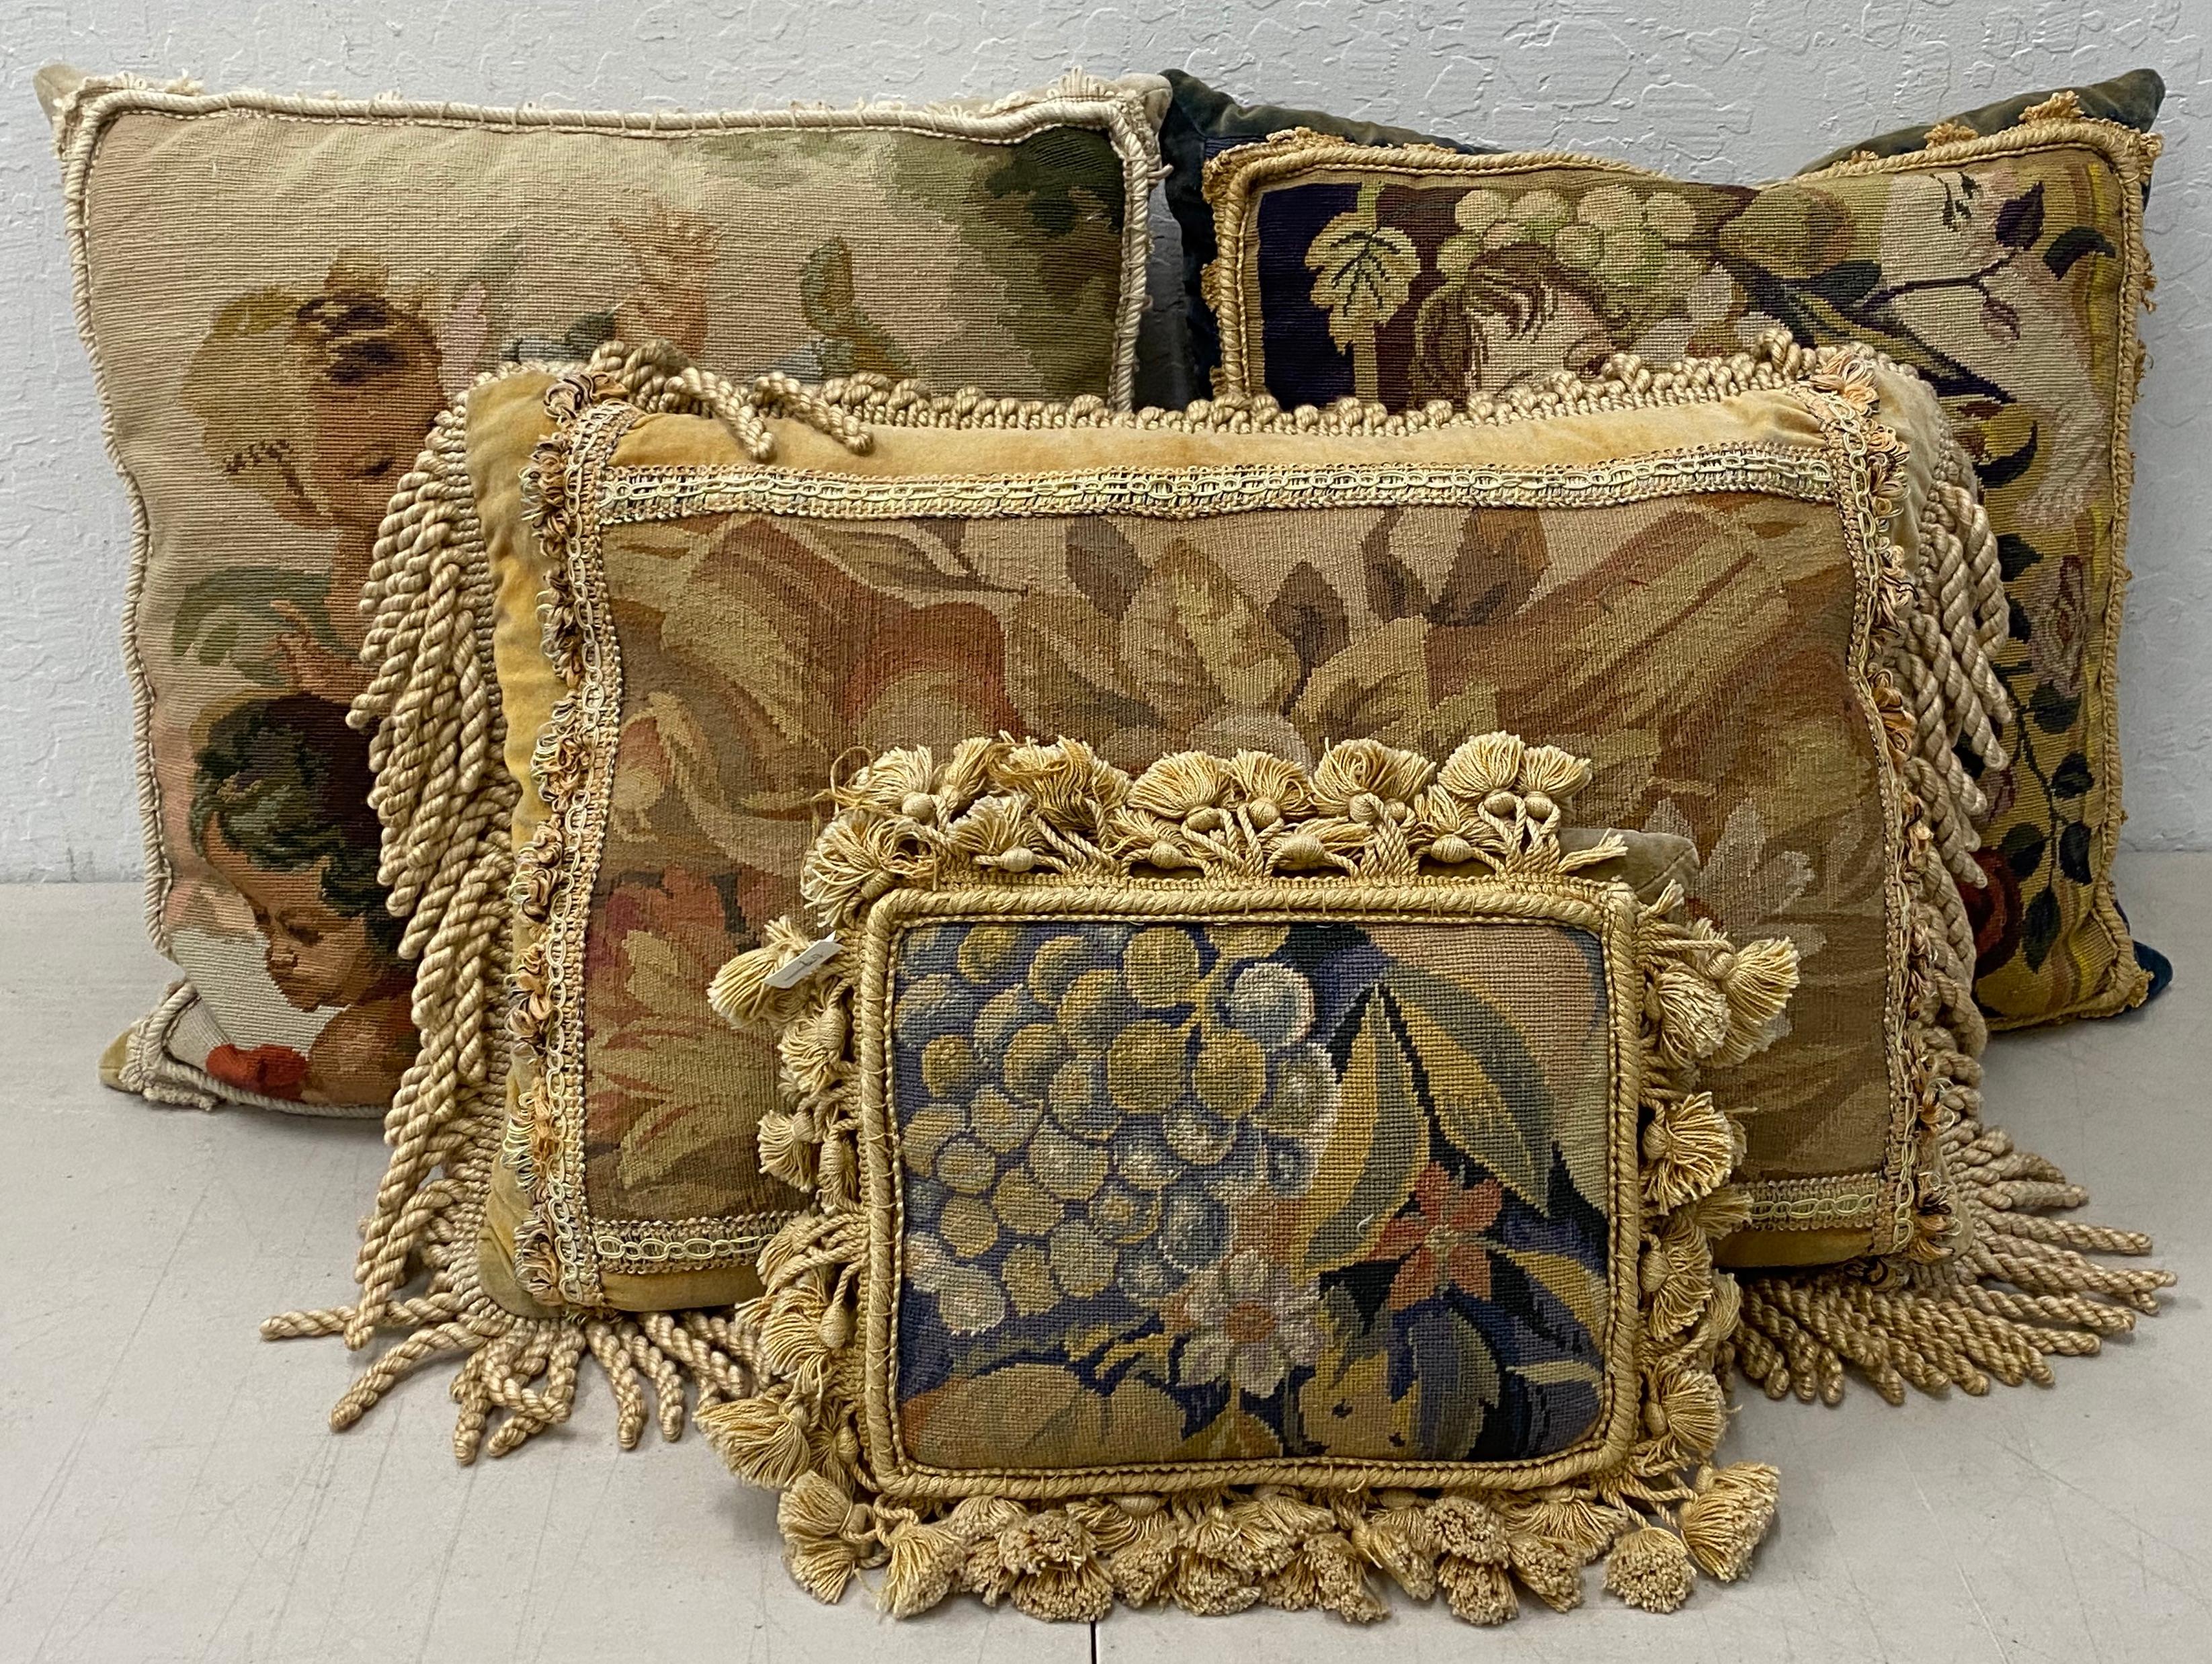 Four gorgeous petit point and needlepoint throw pillows with classical scenes, 20th century.

Absolutely beautiful collection of throw pillows, each a different size.

Each pillow depicts a scene of classical elegance; from a putti with fruit to